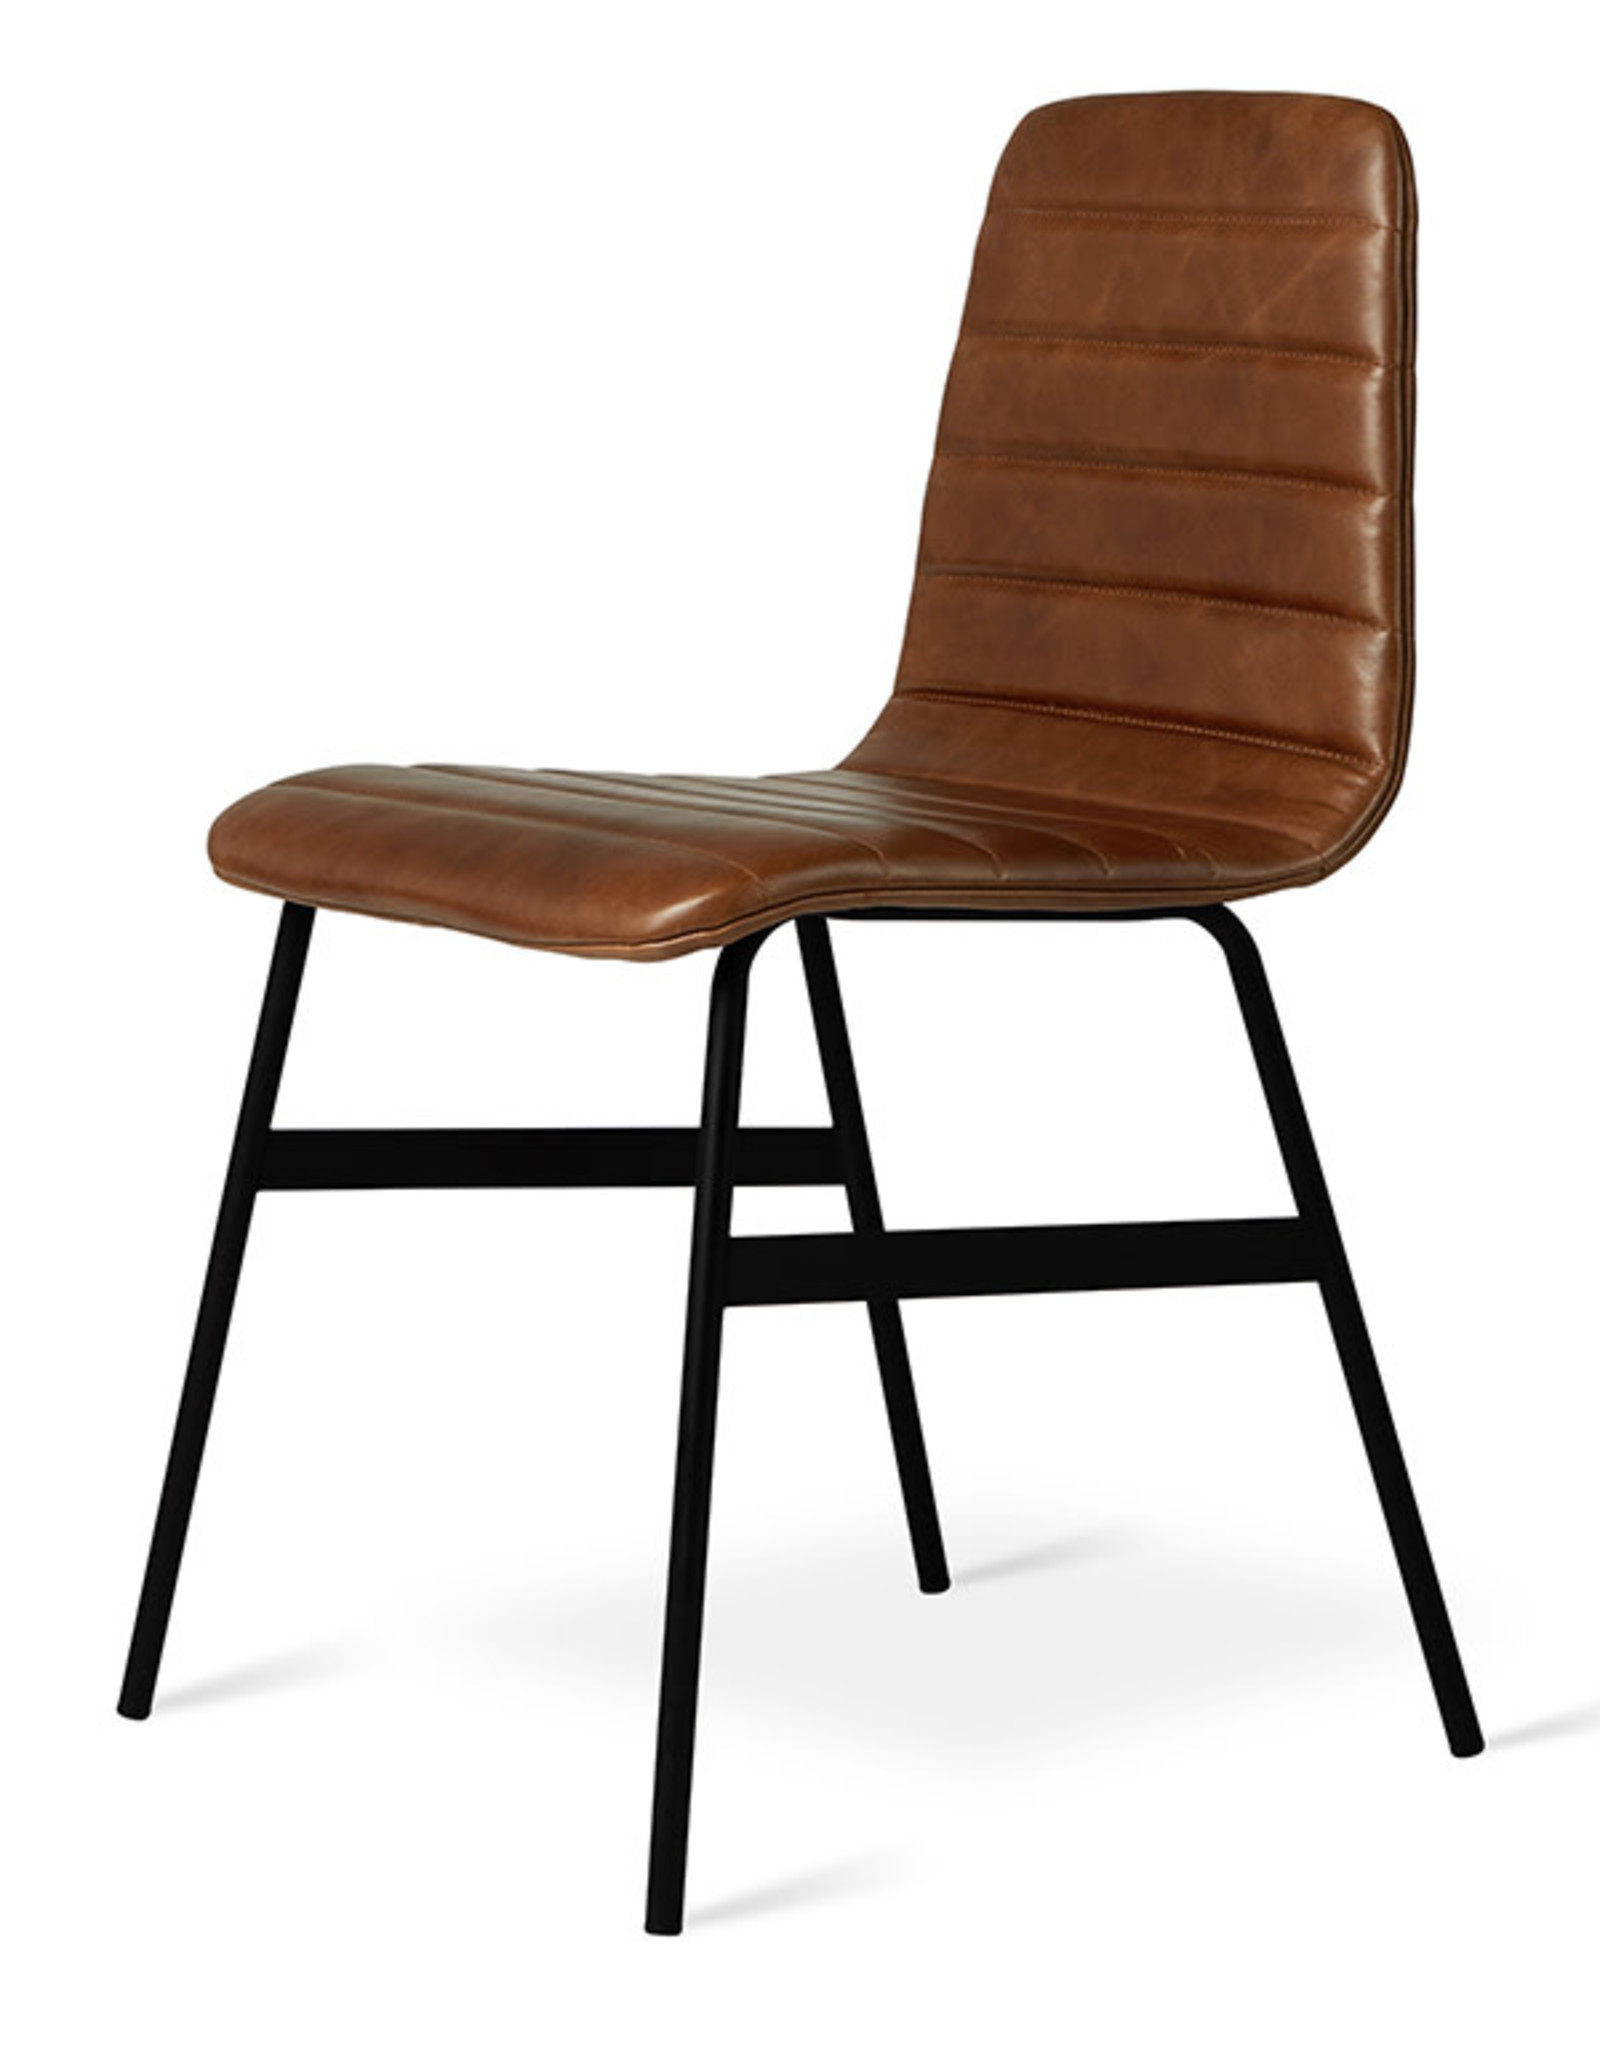 Gus* Modern Lecture Upholstered Chair